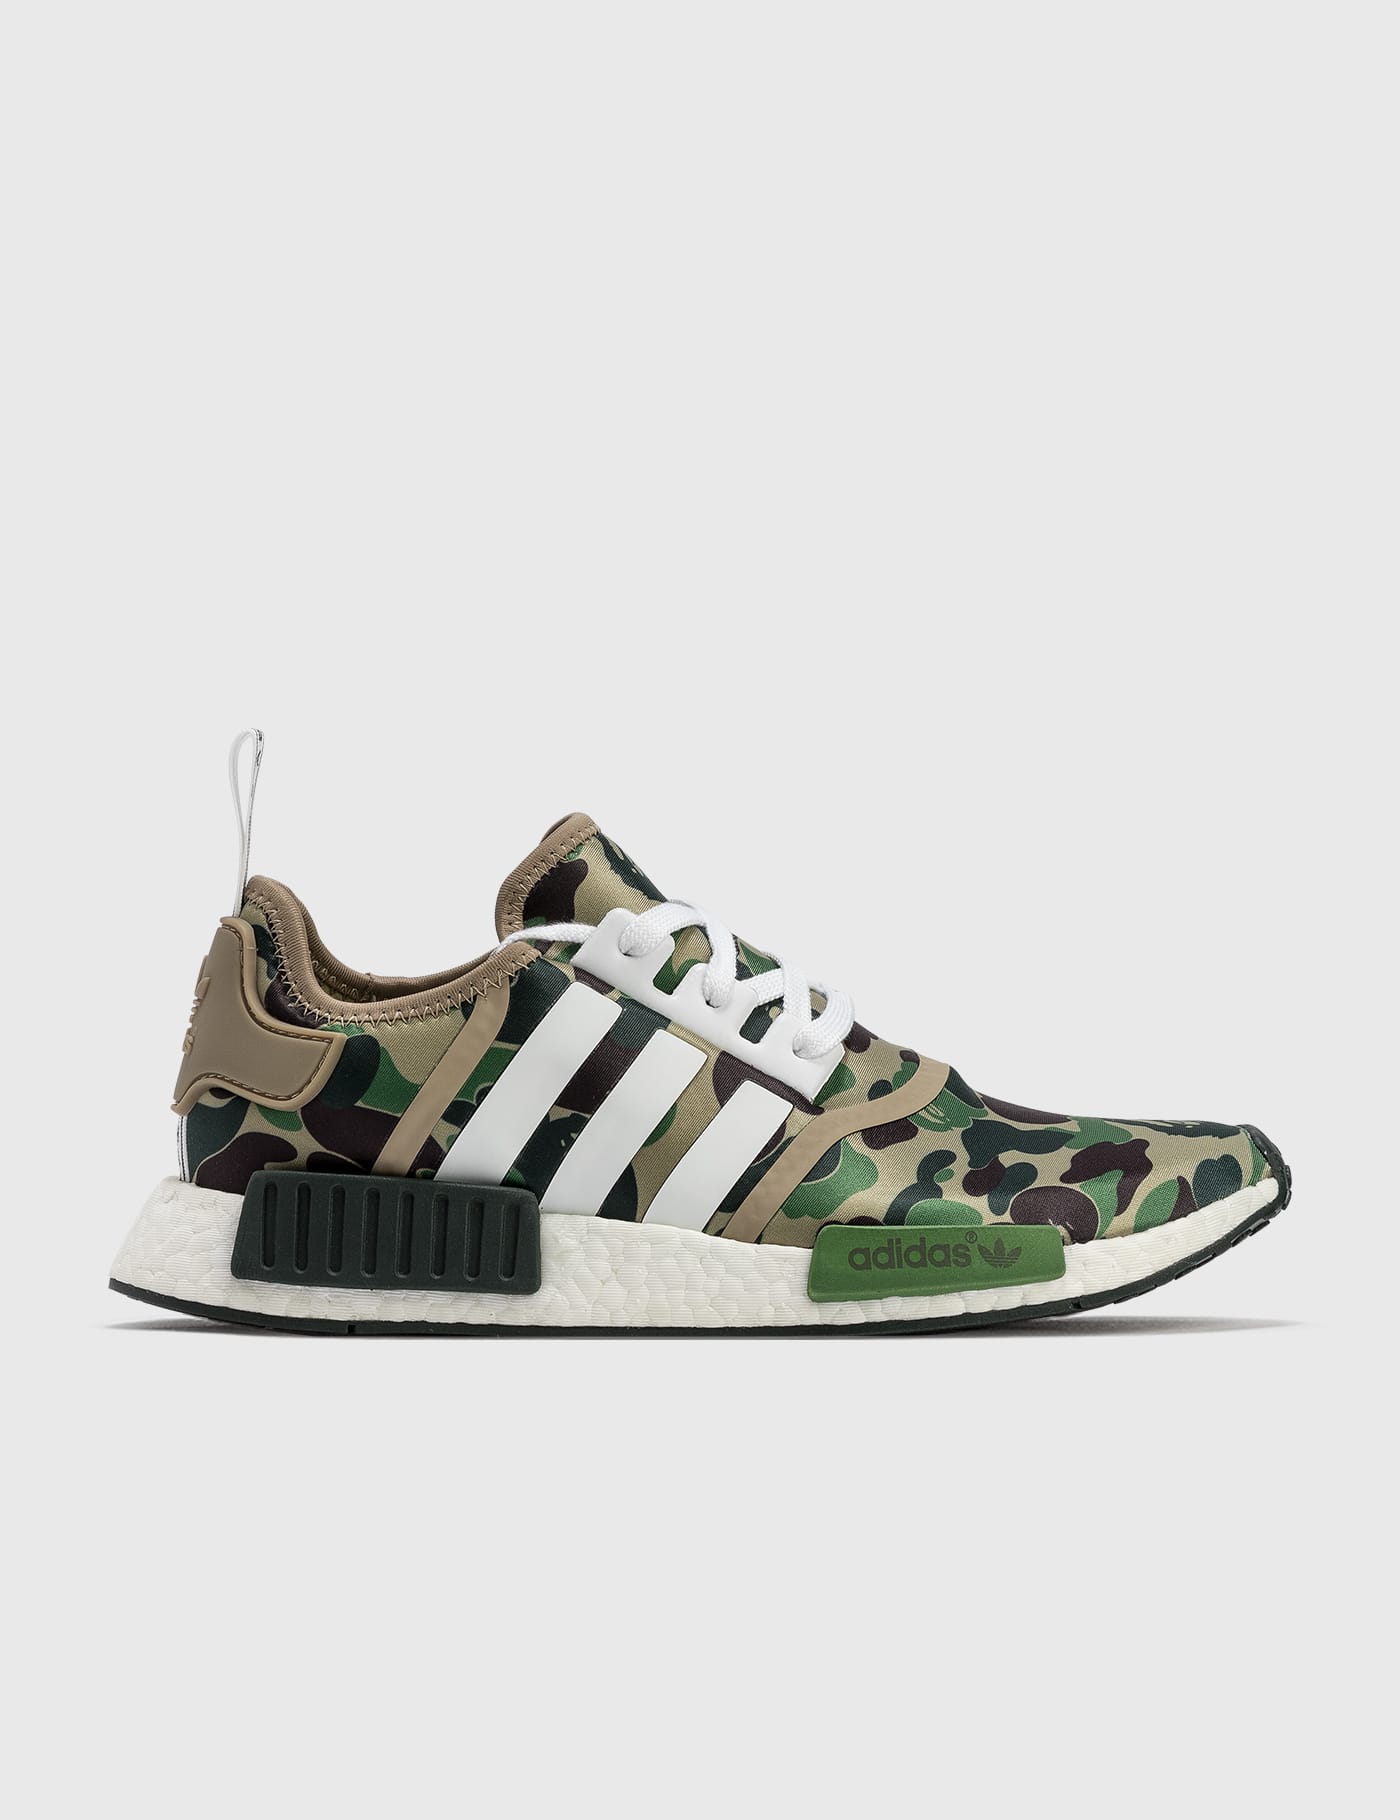 Adidas Originals - Bape X Adidas Originals Nmd R1 | HBX - Globally Curated  Fashion and Lifestyle by Hypebeast اسعار بلاى ستيشن